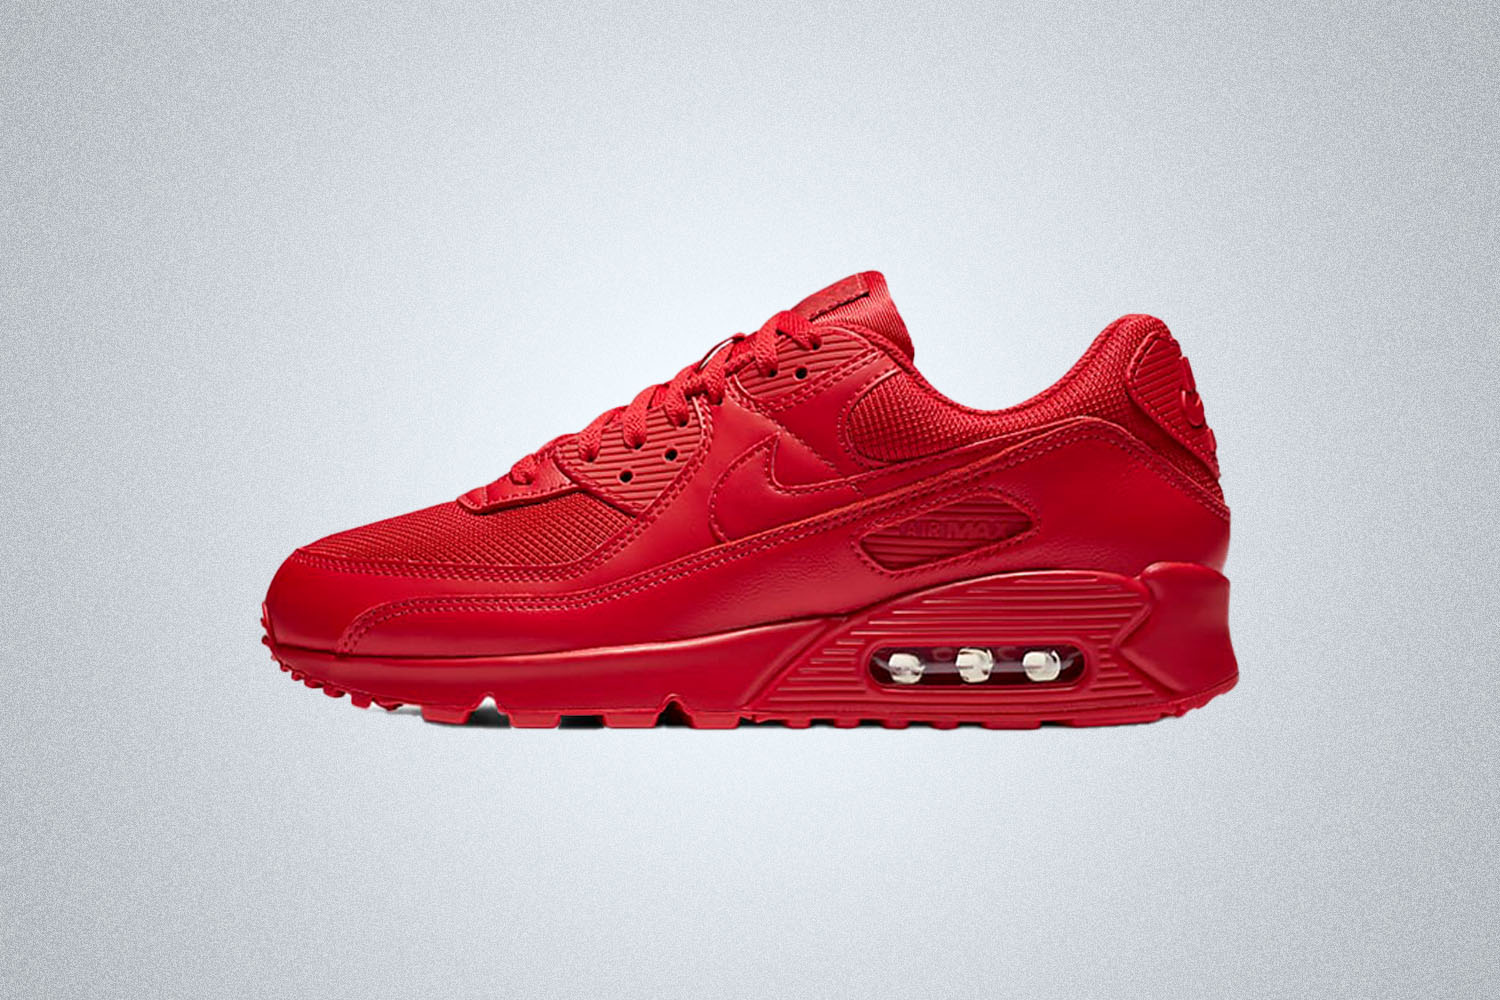 The 20 Best Nike Air Max 90s Of All Time